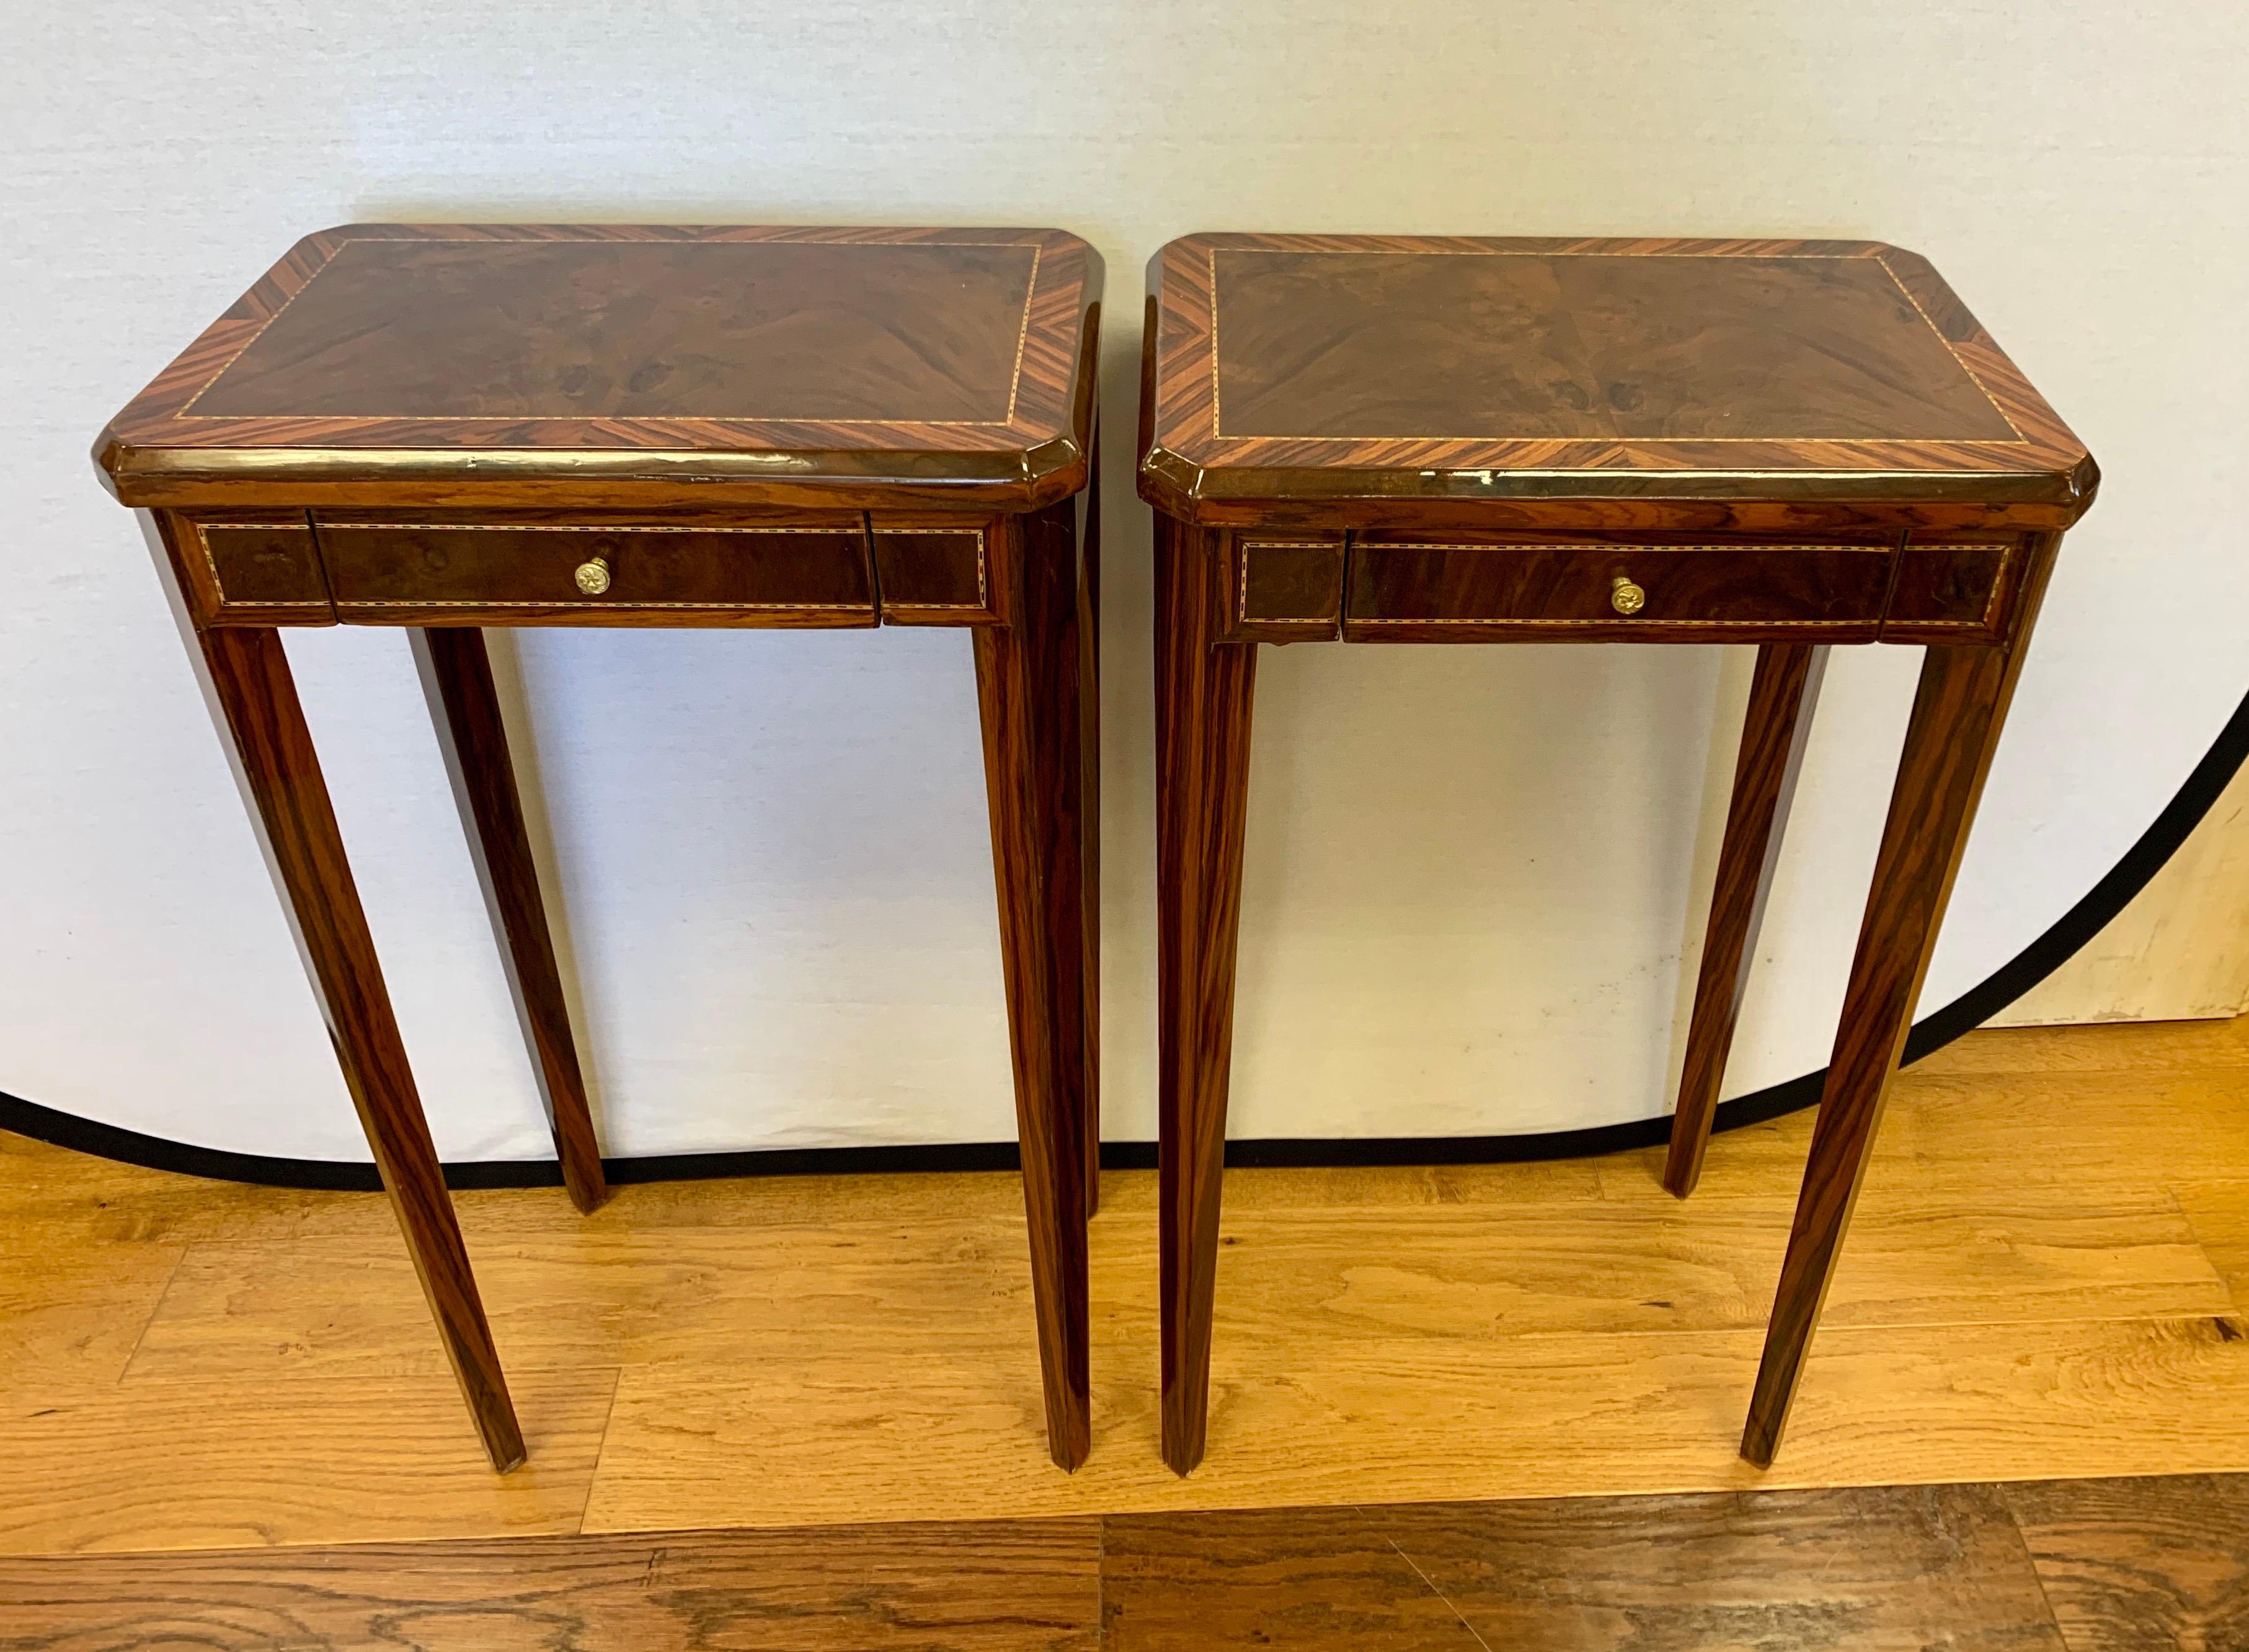 Gorgeous pair of Art Deco style end tables with great scale and better lines. Imported from Italy in the 1960s. Great condition and gorgeous, subtle inlay.